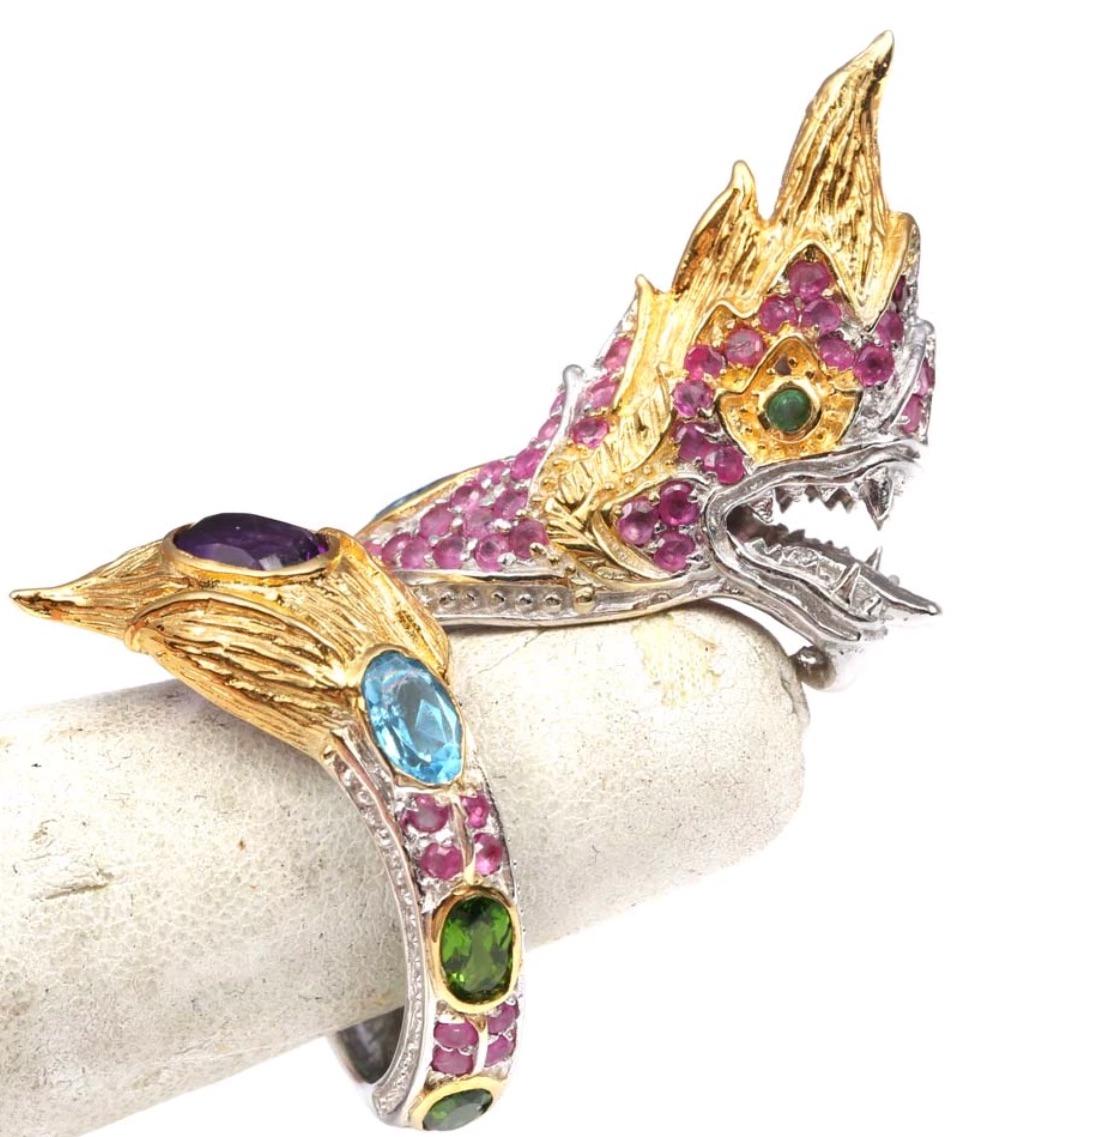 Be the One and Only to wear this Gorgeous Fierce Dragon wrapped around your finger-any finger that fits is fitting!
A colorful rainbow of gems cover this dragon with his mouth open, teeth showing and tongue out daring anyone to play his